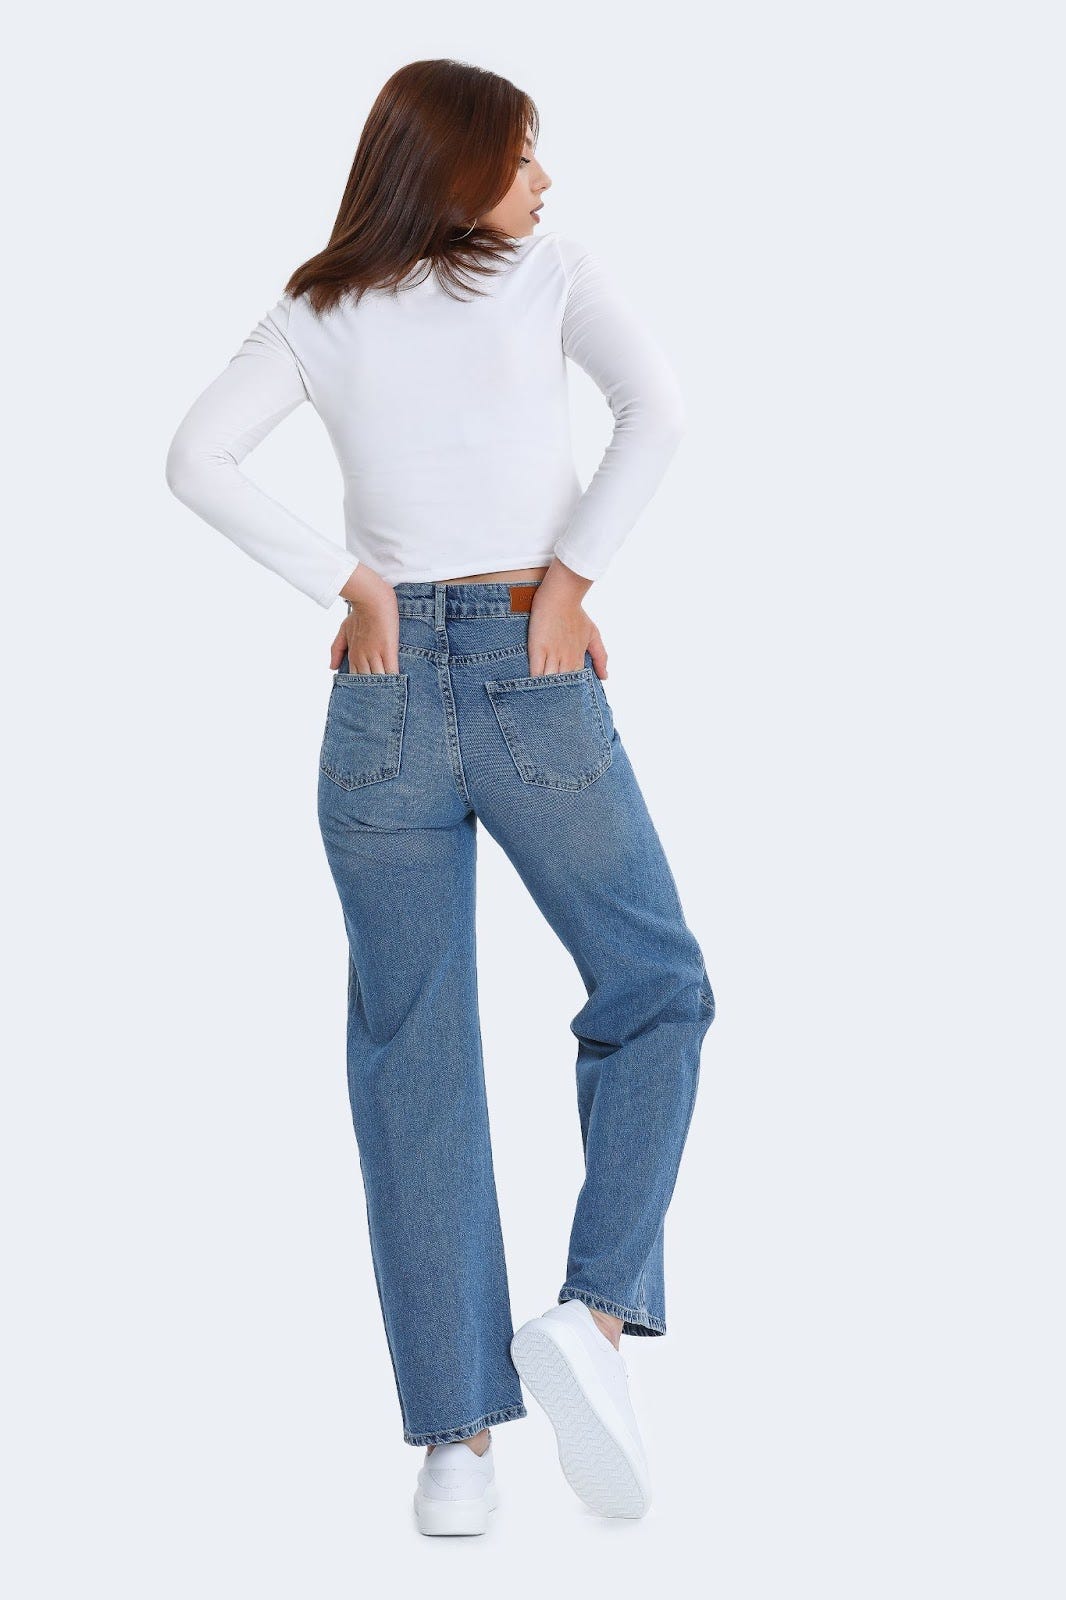 How Do You Know If Jeans Are Too Tight? | by WomenDresses | Medium